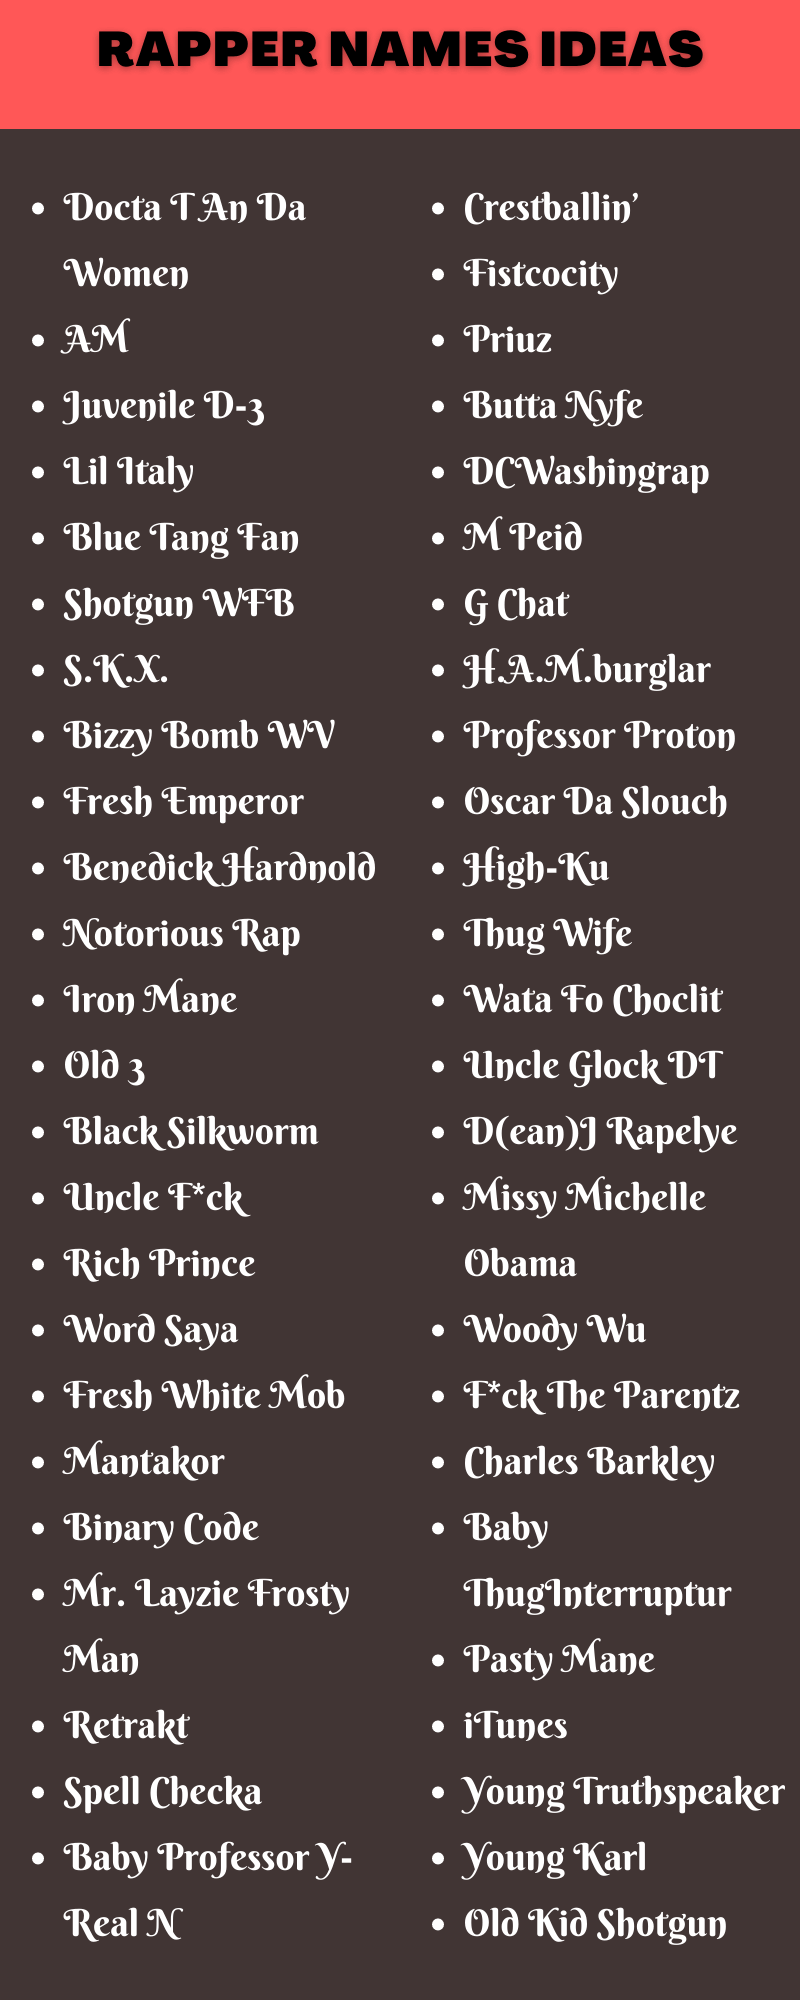 400 Creative Rapper Names Ideas and Suggestions